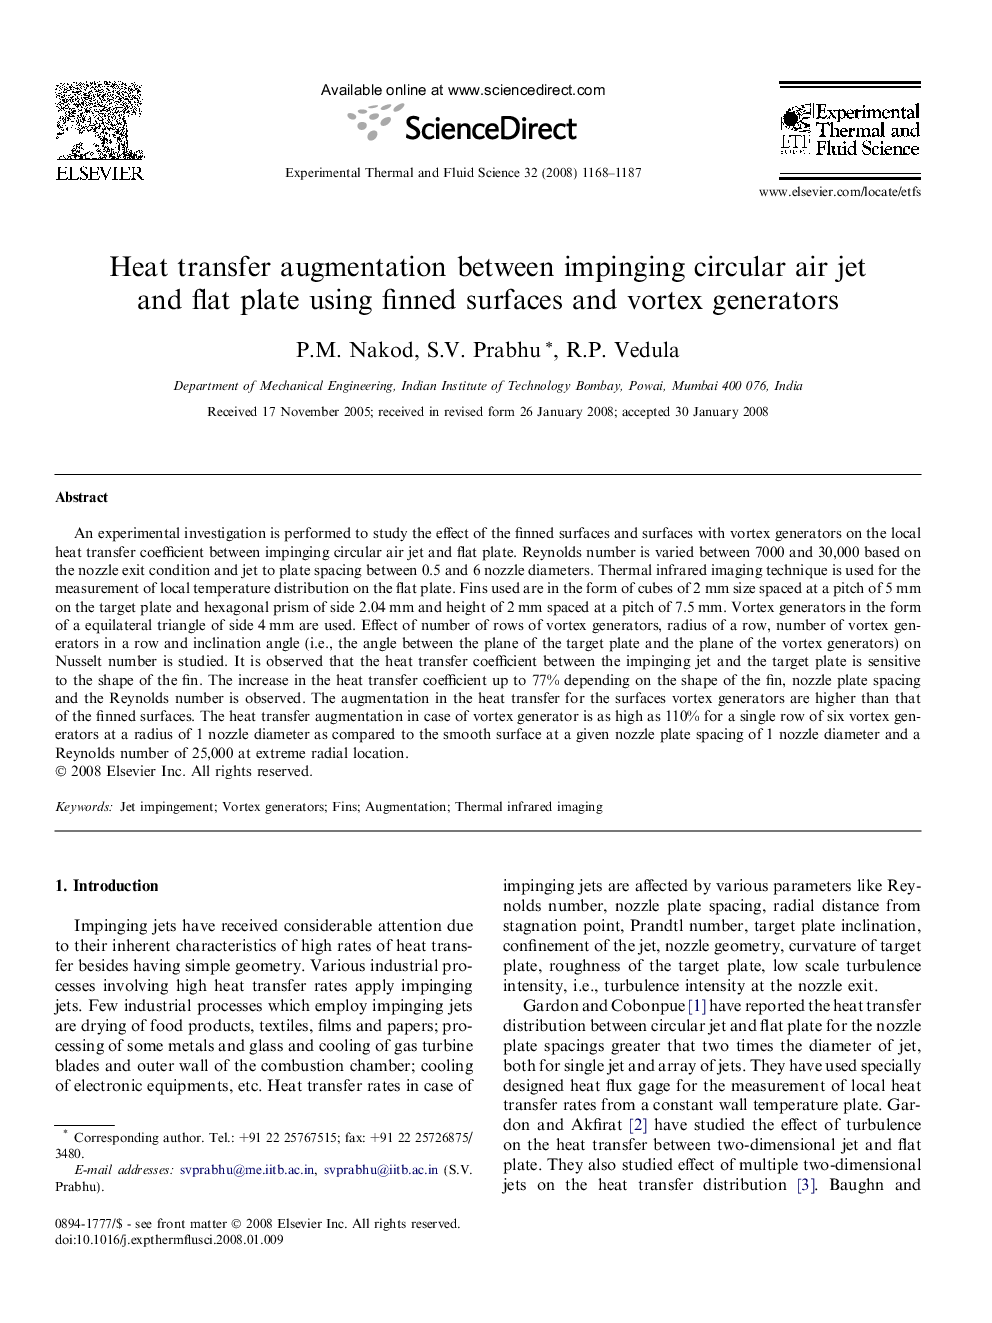 Heat transfer augmentation between impinging circular air jet and flat plate using finned surfaces and vortex generators